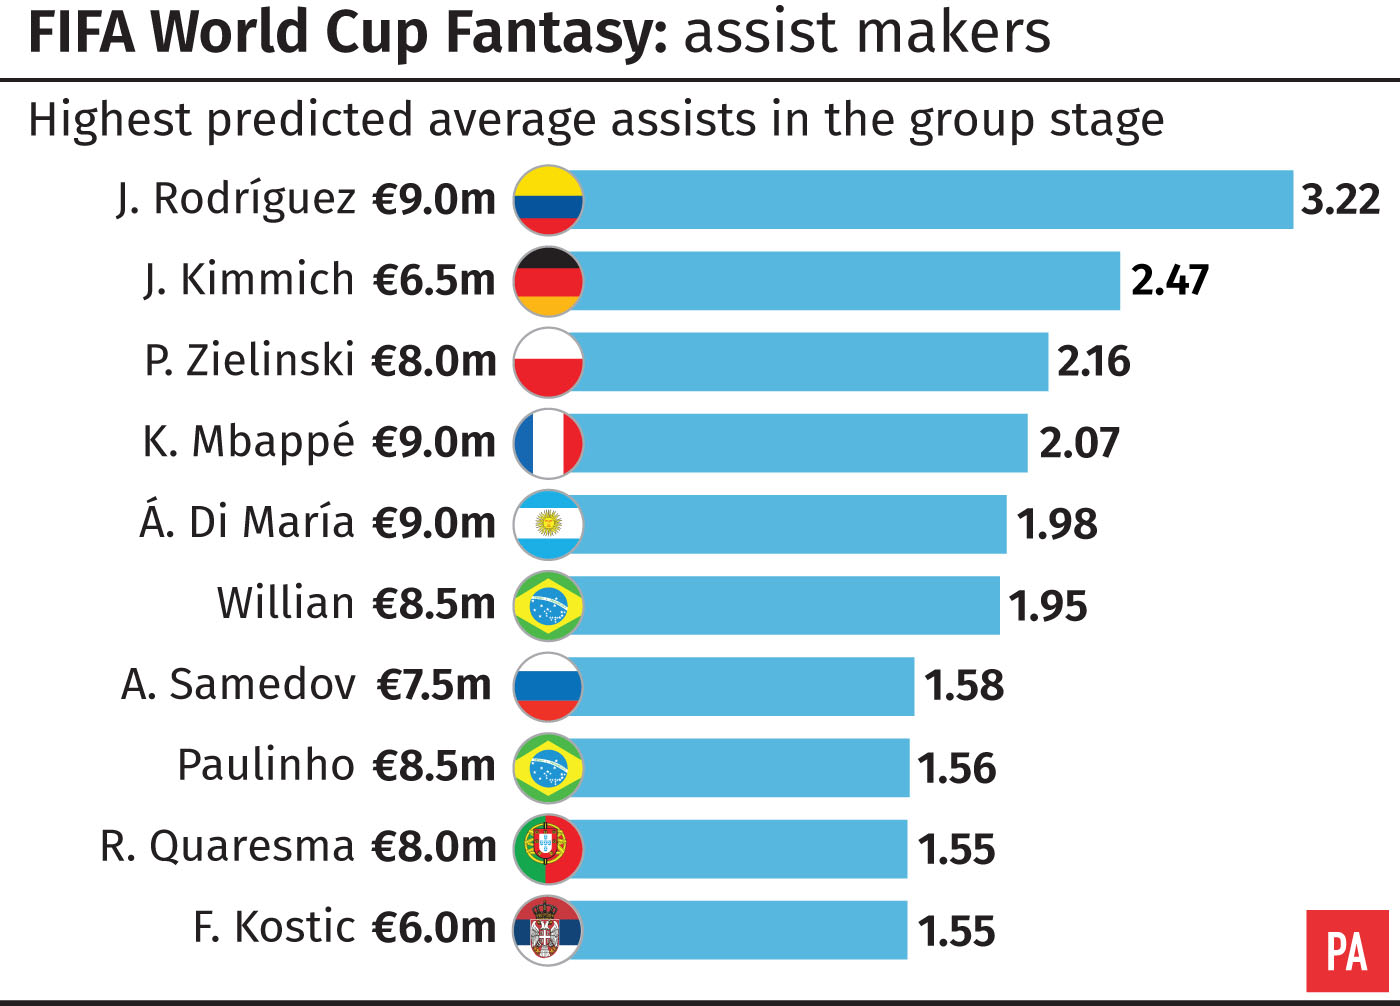 Which player will contribute the most assists at the group stage of the 2018 World Cup?